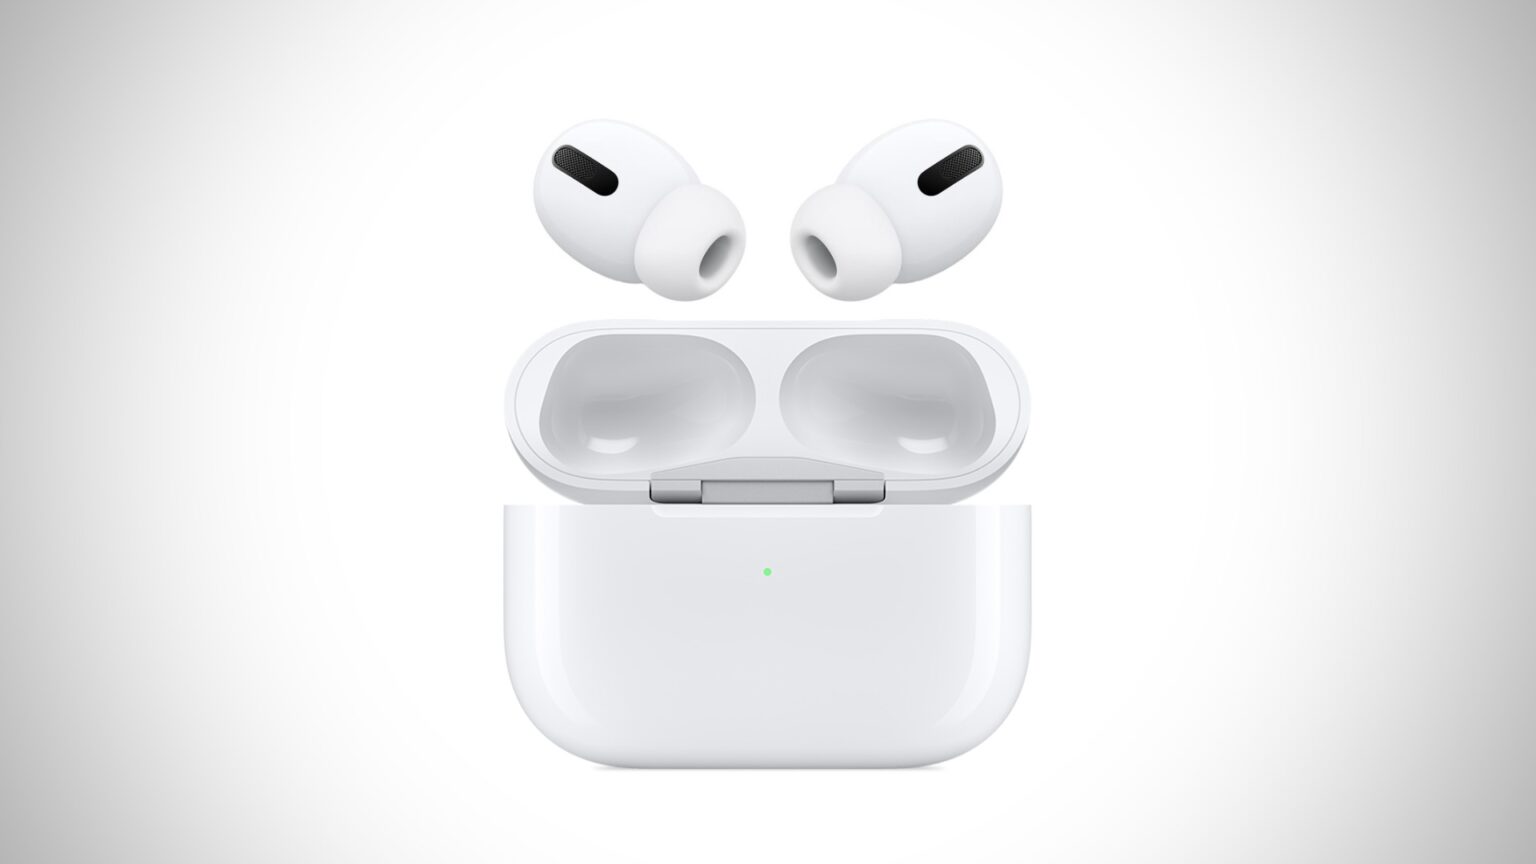 AirPods Pro 2 could be among Apple's earphones that take advantage of the new Bluetooth standard.